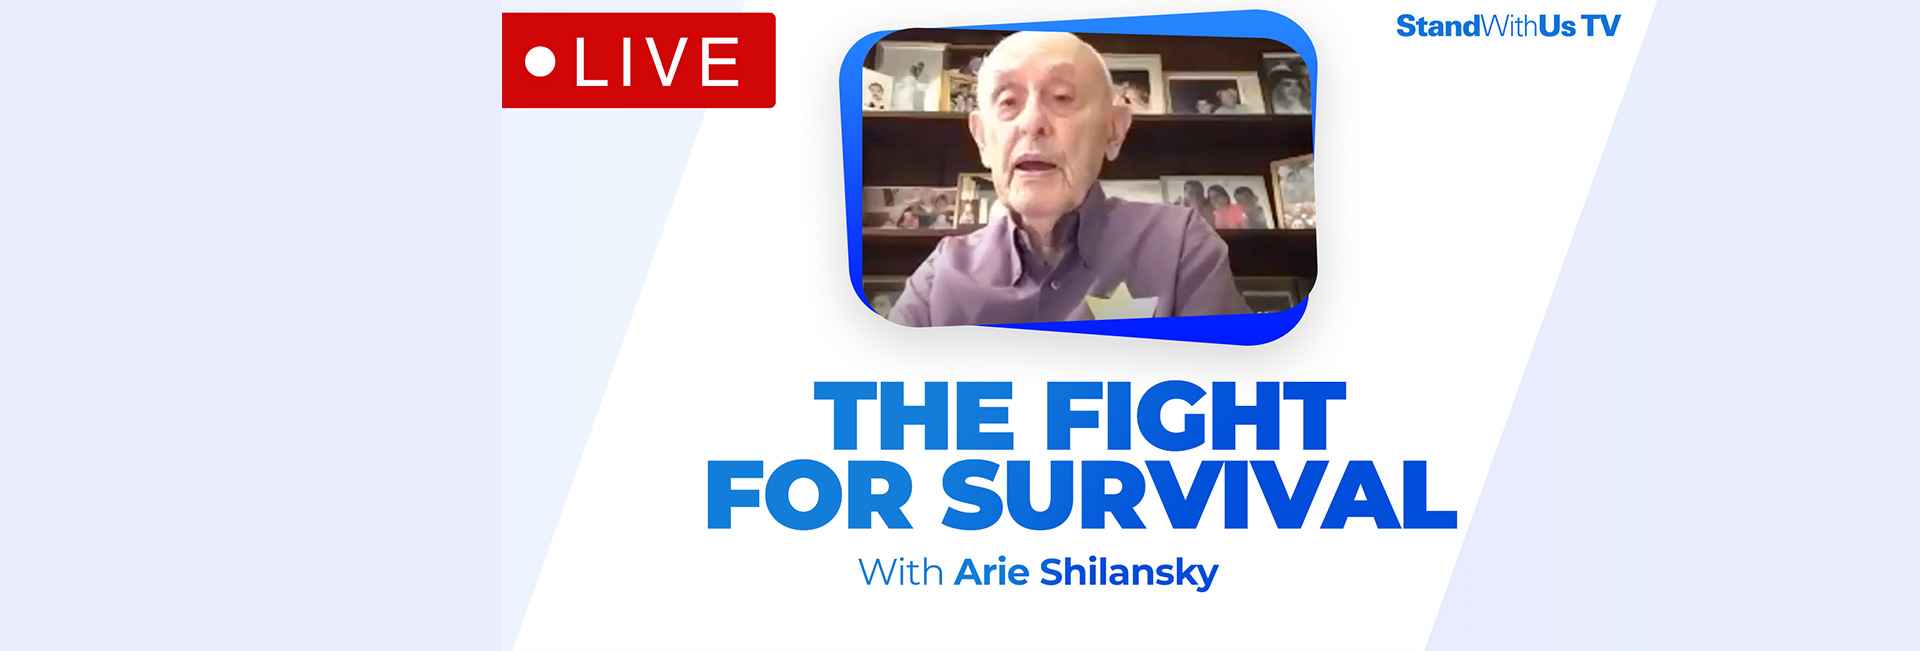 The Fight for Survival — A Powerful Conversation between a Holocaust Survivor and his Grandson